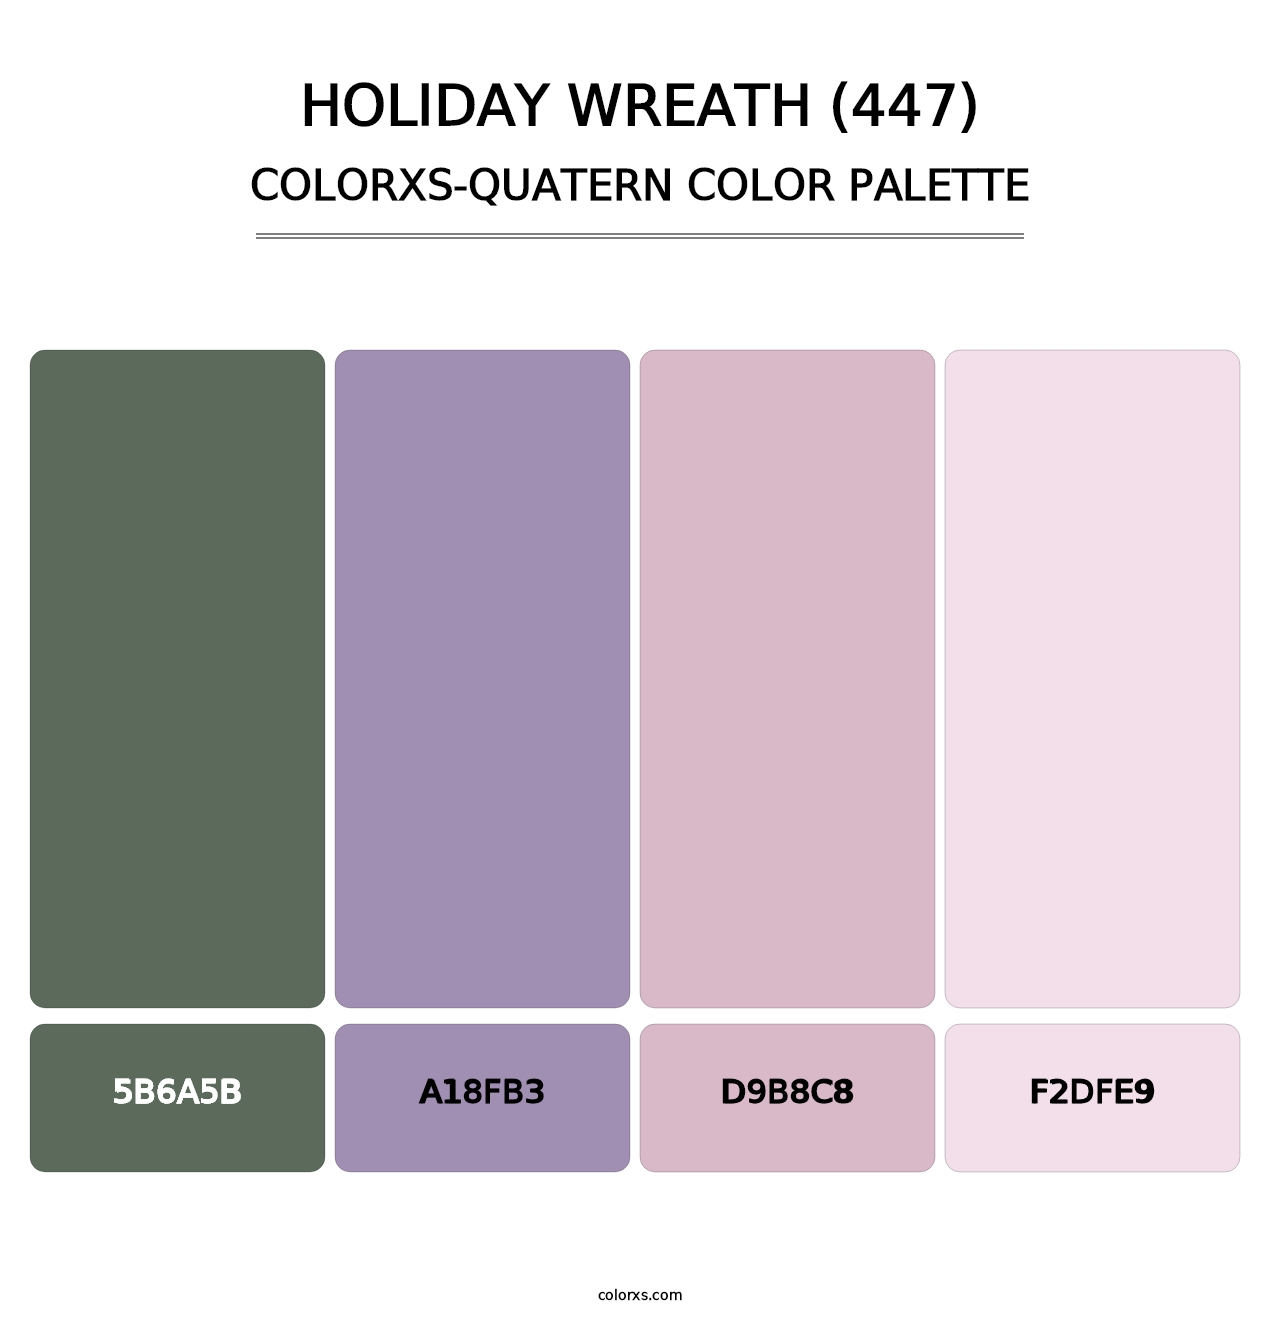 Holiday Wreath (447) - Colorxs Quatern Palette